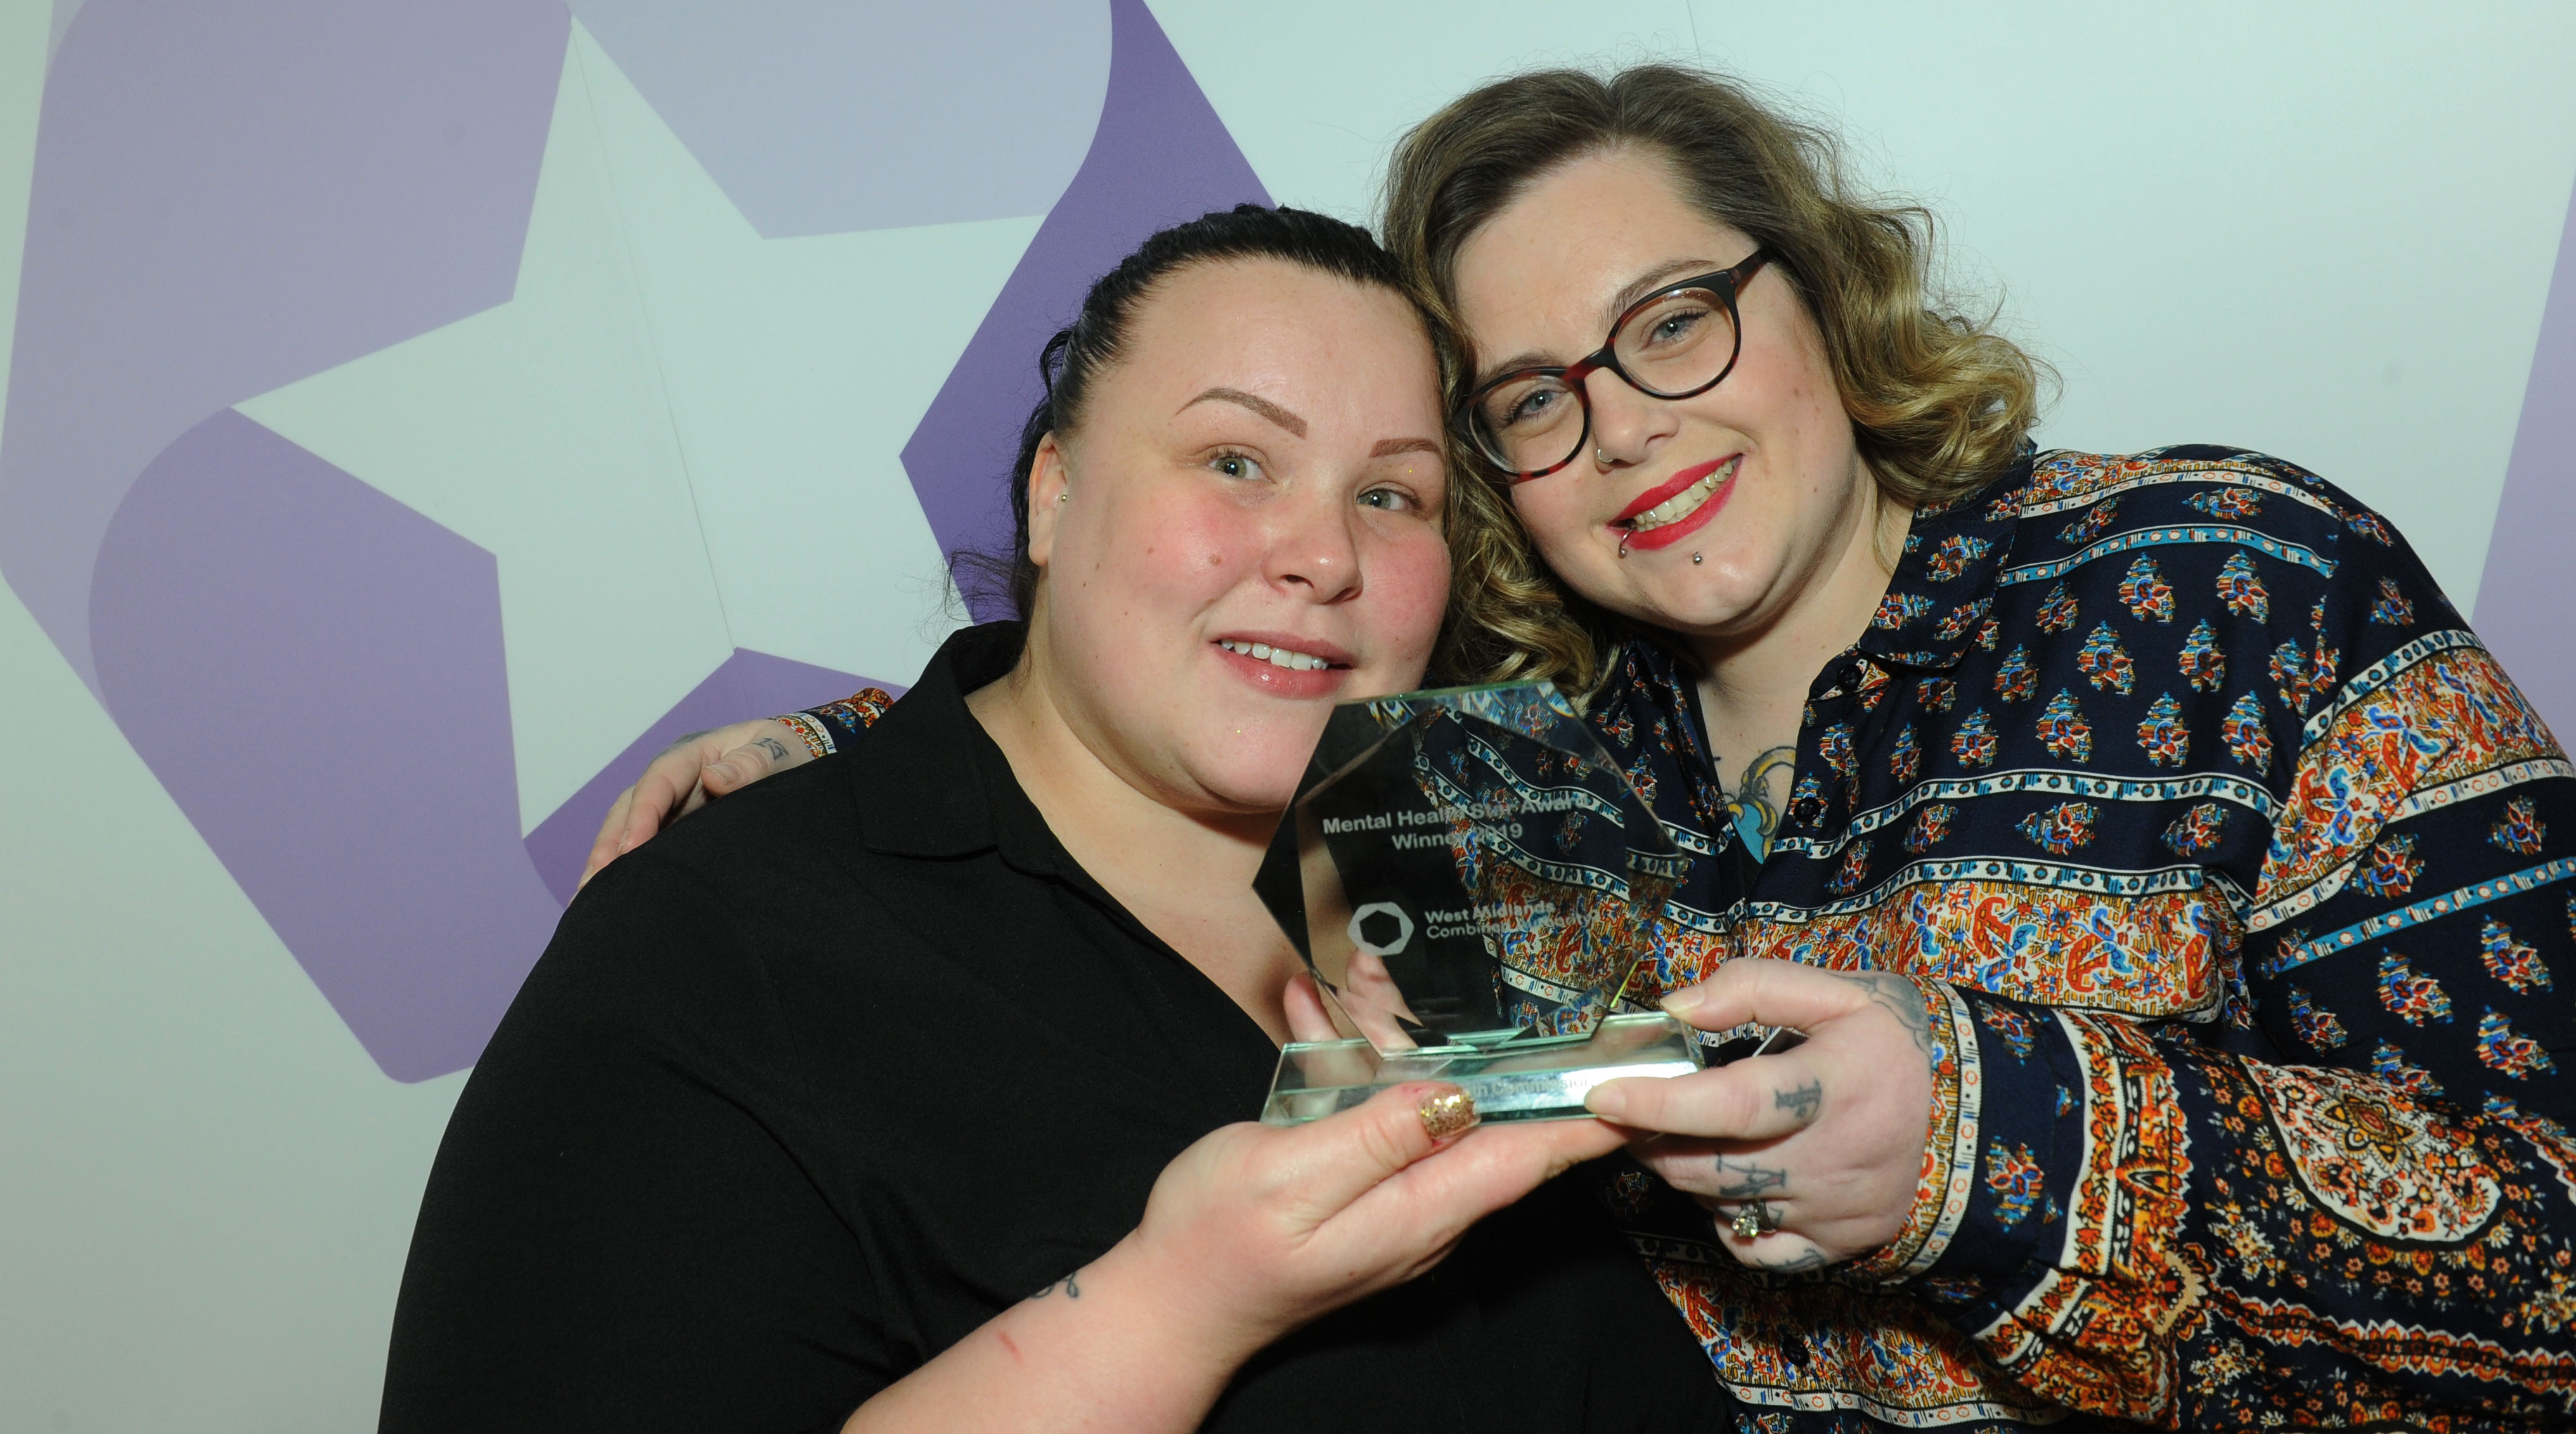 Laura Fogarty (left) and Laura Gee with their award